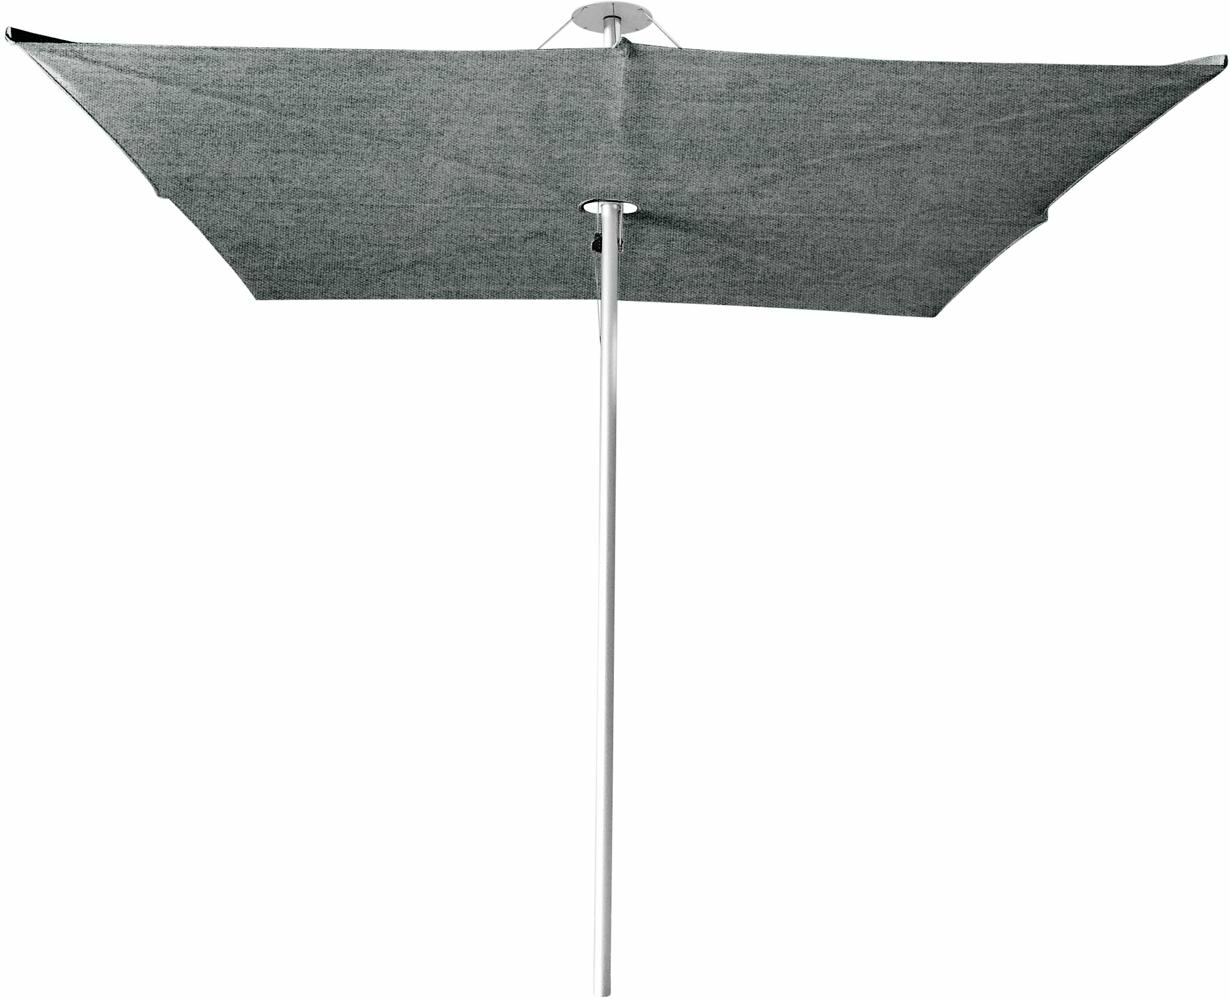 Infina center post umbrella, 3 m square, with frame in Aluminum and Colorum Flanelle canopy.